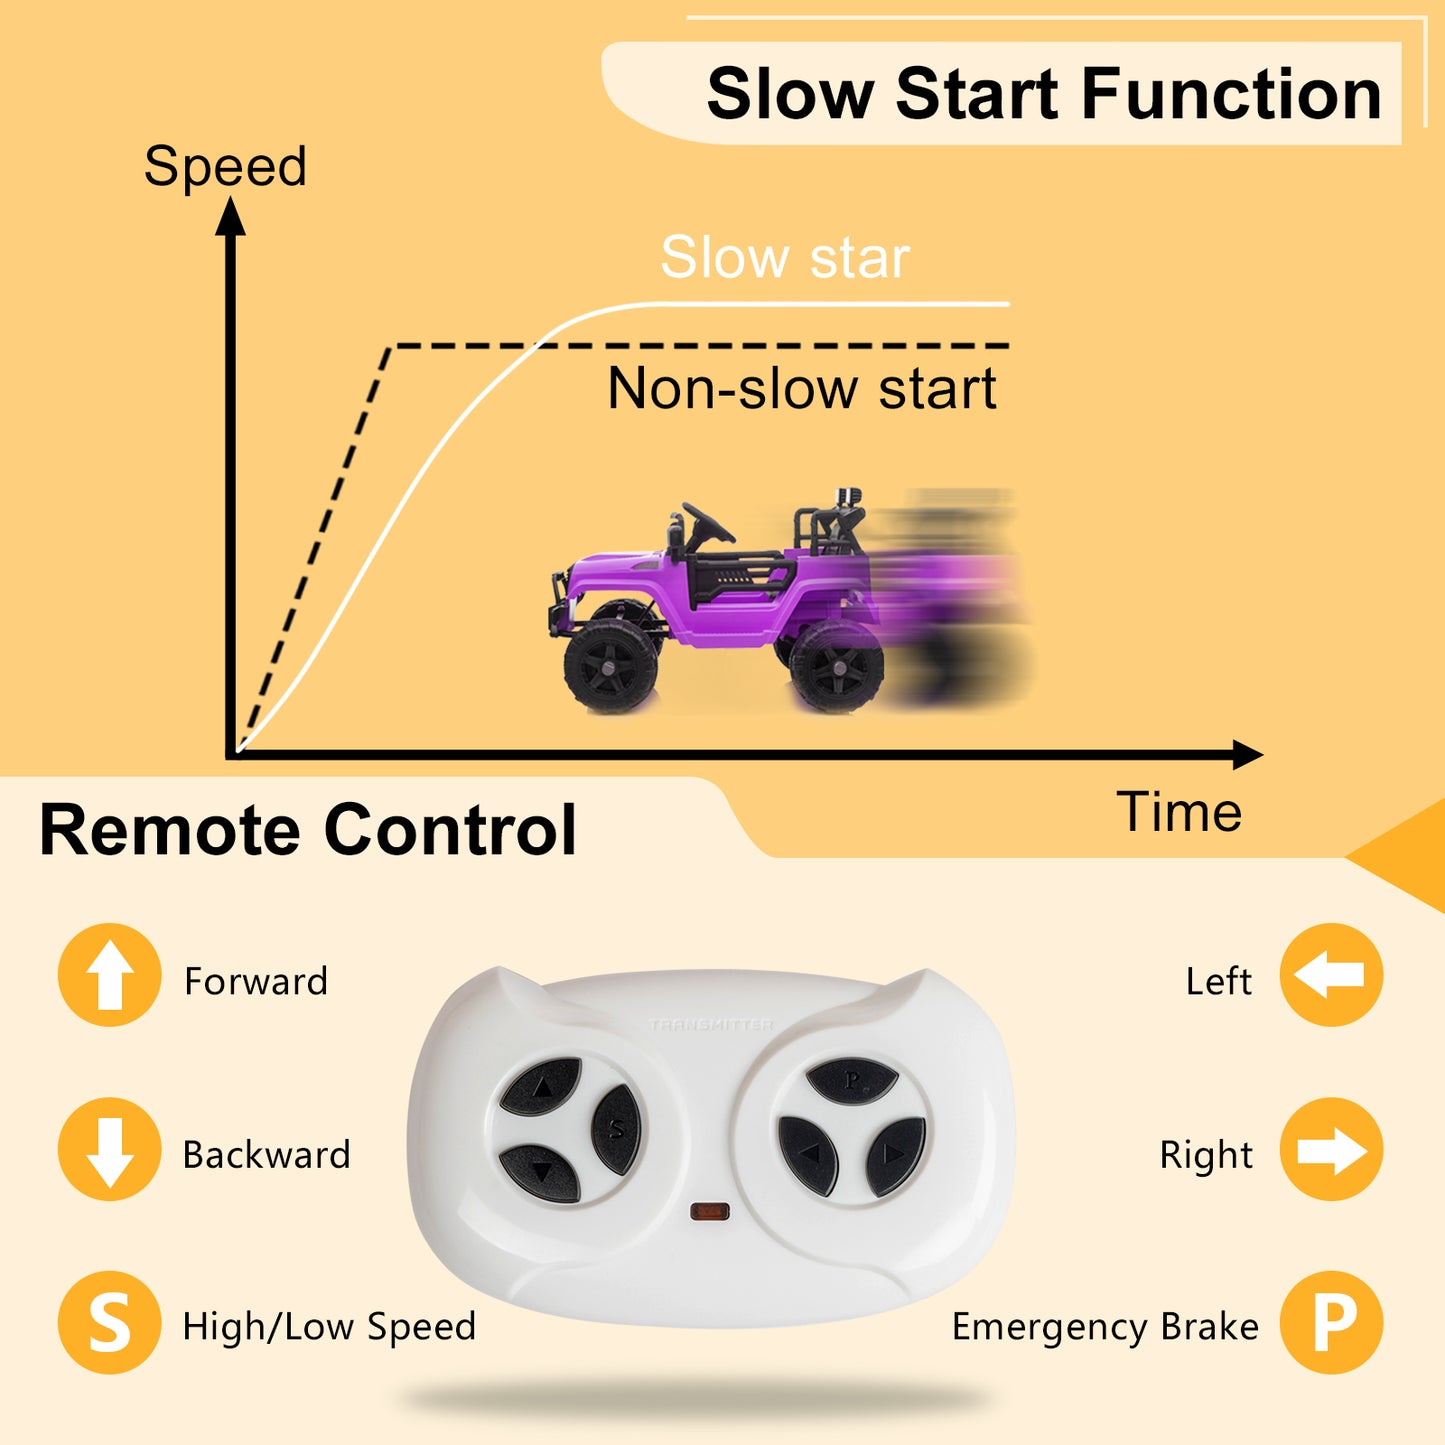 12V Ride on Cars with Remote Control, BTMWAY Kids Ride on Toys for Toddlers Boys Girls Gifts, Battery Powered Kids Electric Cars, Ride on Trucks with MP3 Player, LED Headlight, 3 Speeds, Purple